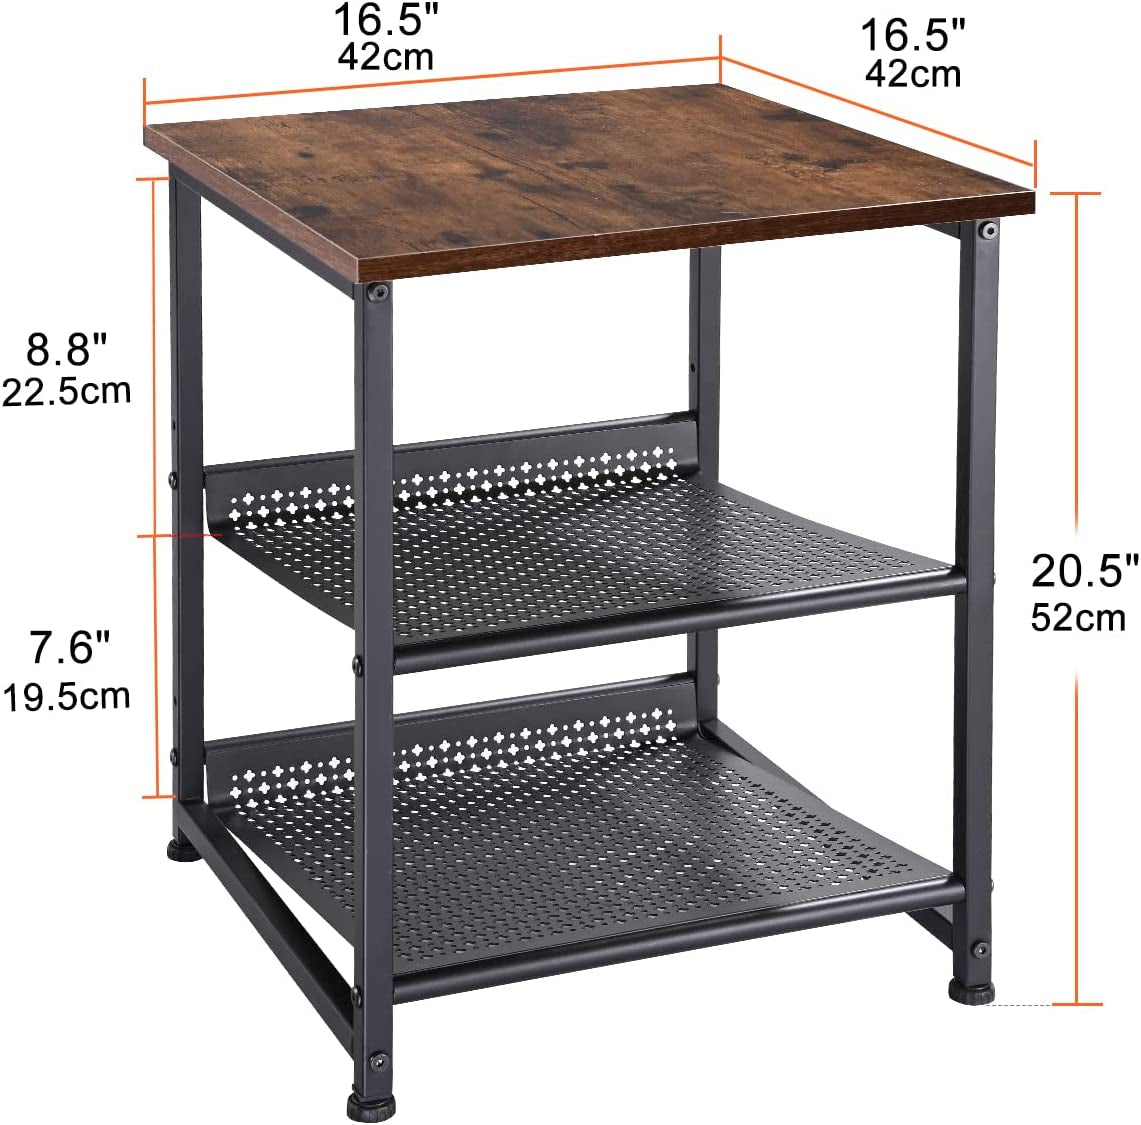 Side Table, Nightstand, Set of 2 Industrial Style Sofa End Table 42 X 42 X 52 Cm,With 2 Adjustable Mesh Shelves, Easy Assembly, for Living Room,Bedroom, Office,Wood & Metal,Rustic Brown